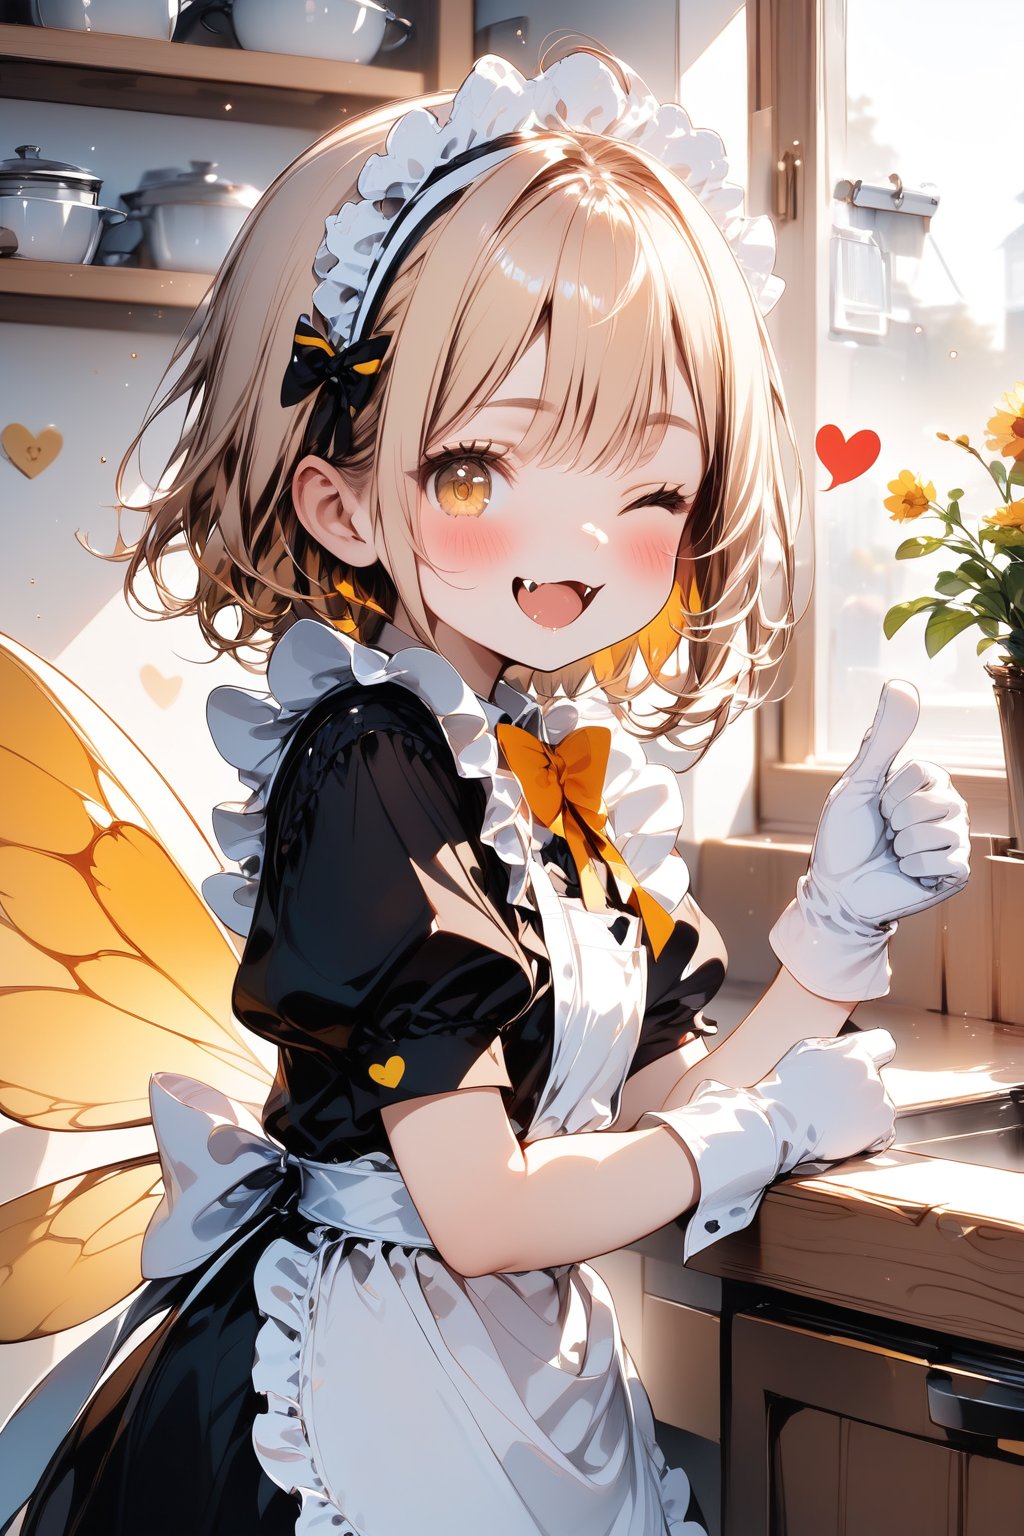 //quality, masterpiece:1.4, detailed:1.4, best quality:1.4,//,1girl,solo,loli,//,(yellow hair),short_hair,yellow eye,one_eye_closed,(winking),//,(bee_wings),(hearts_symbols),bow,maid headband,hearts_symbols, white maid_costume, white gloves,//, blush, mouth_open, smile,cute_fangs,//,(thumbs_up),//,indoors, 
kitchen,Deformed,from_side,Details,Detailed Masterpiece